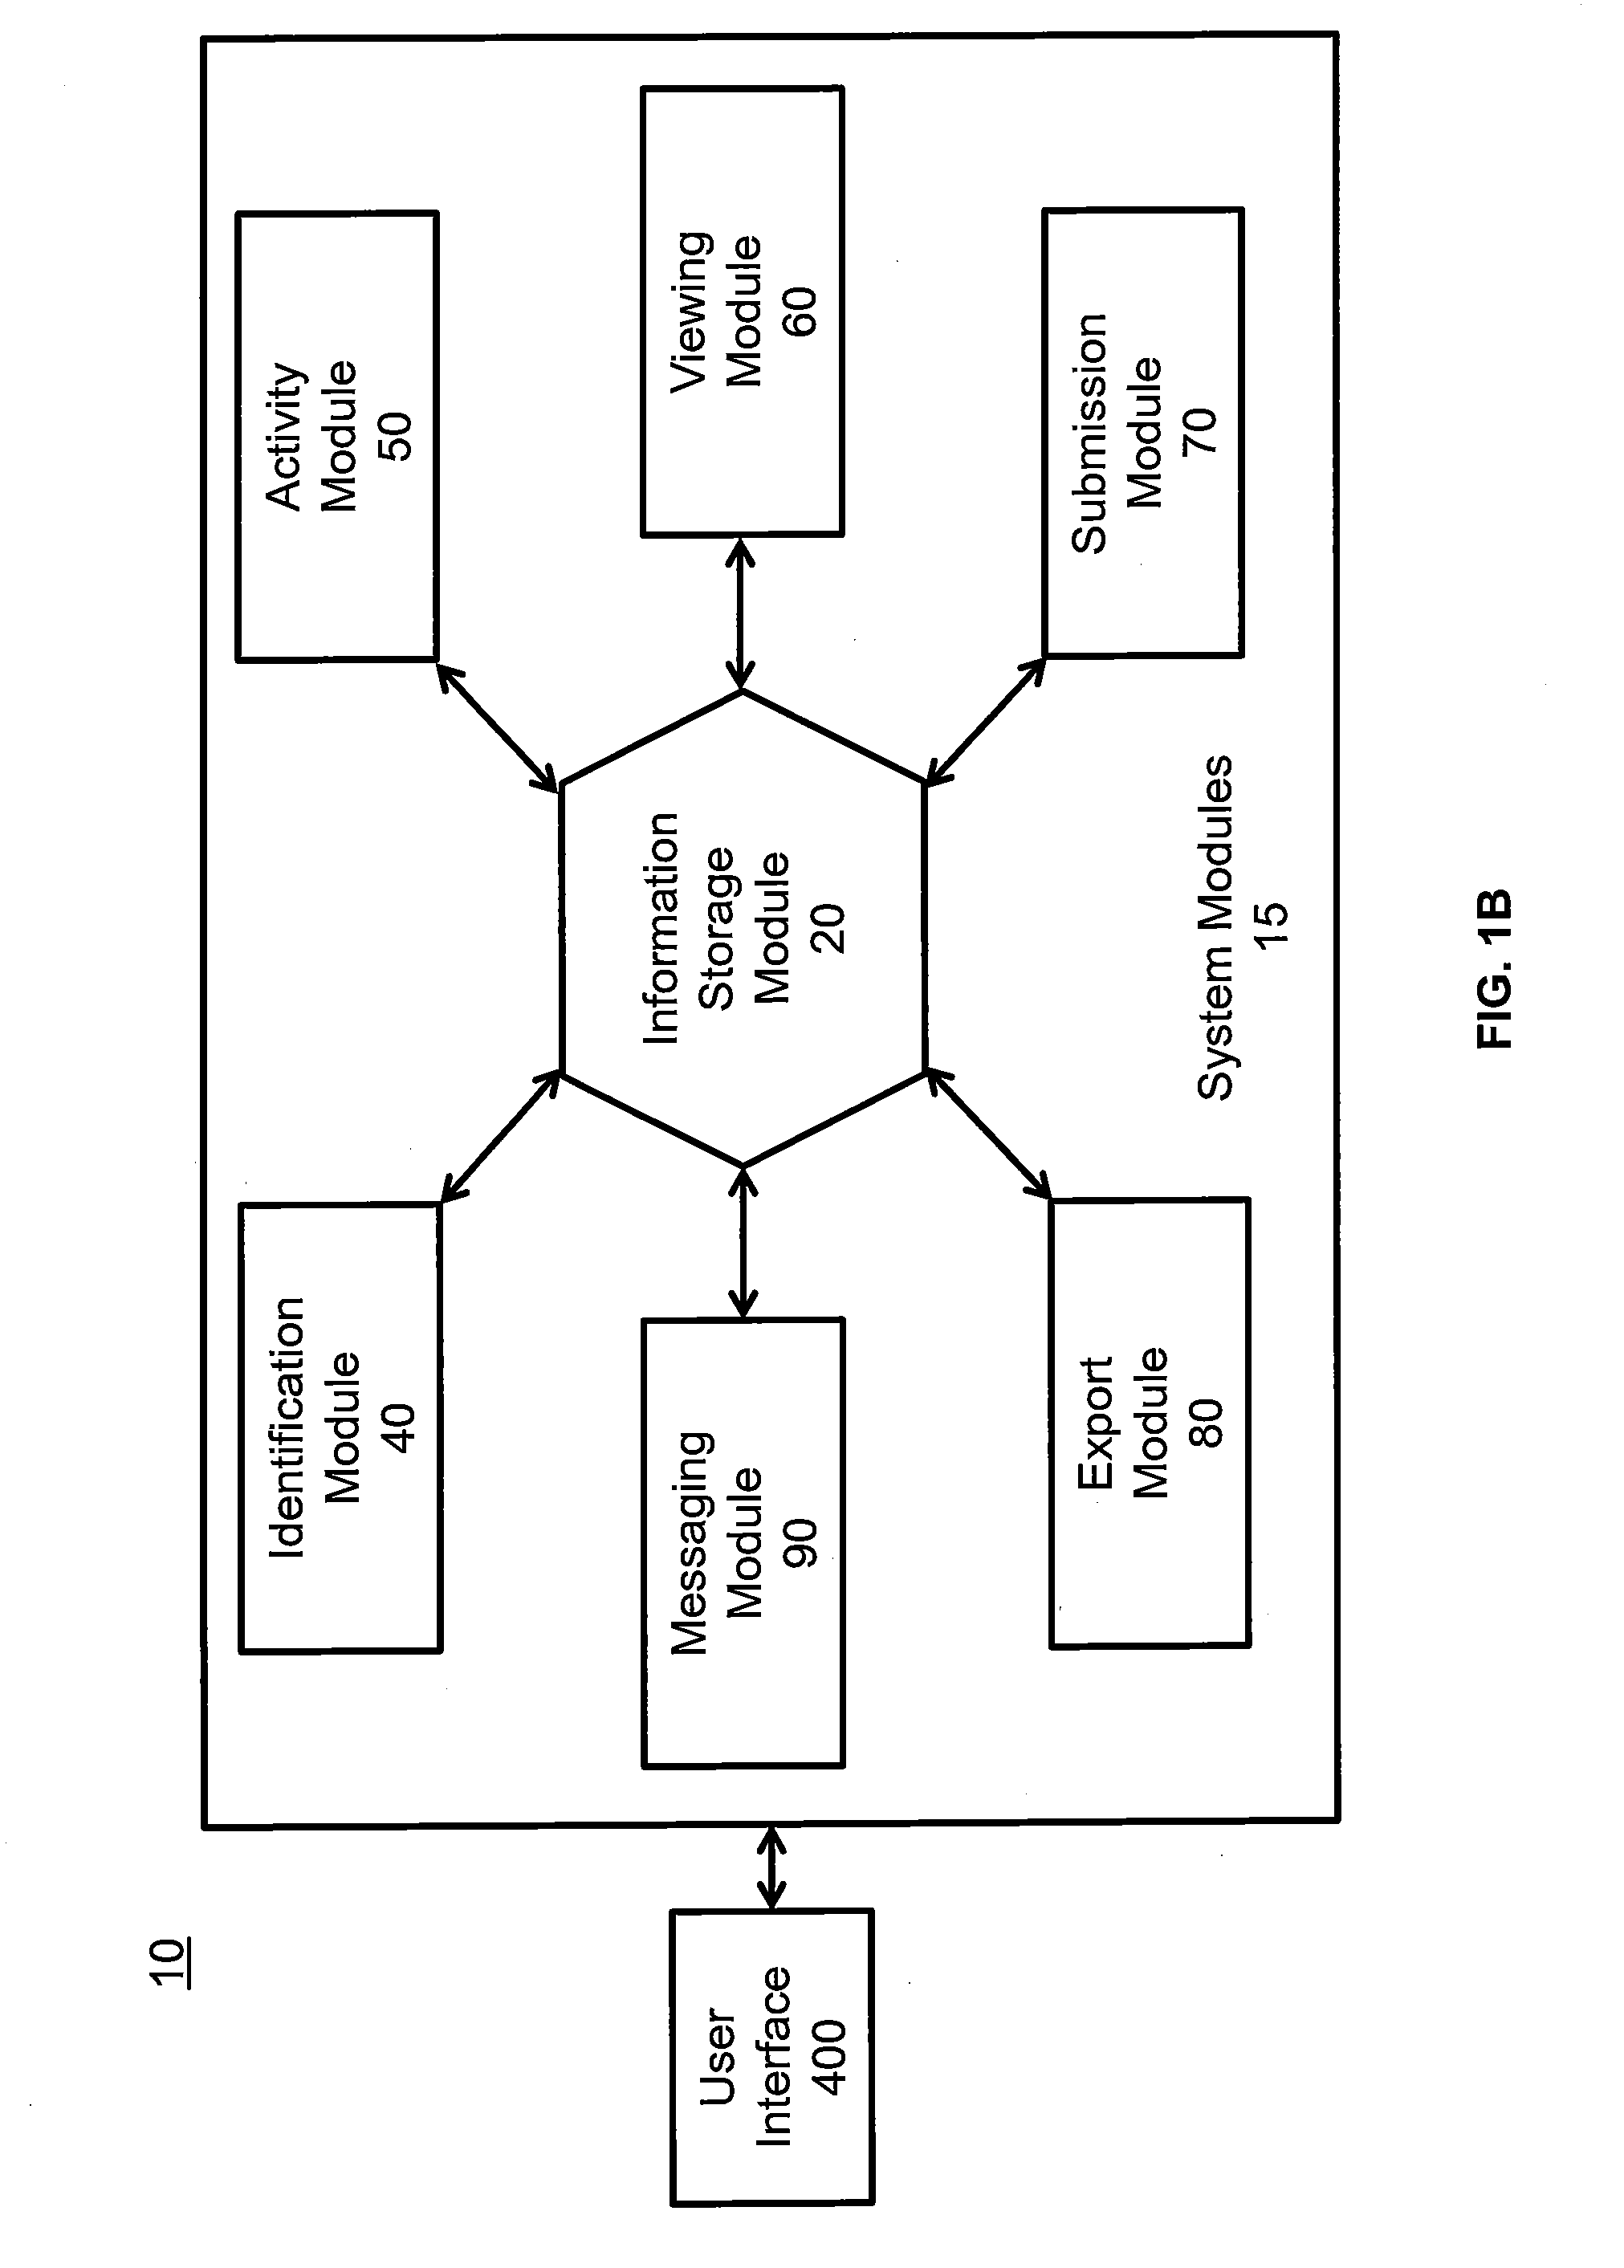 Systems and methods for identifying objects